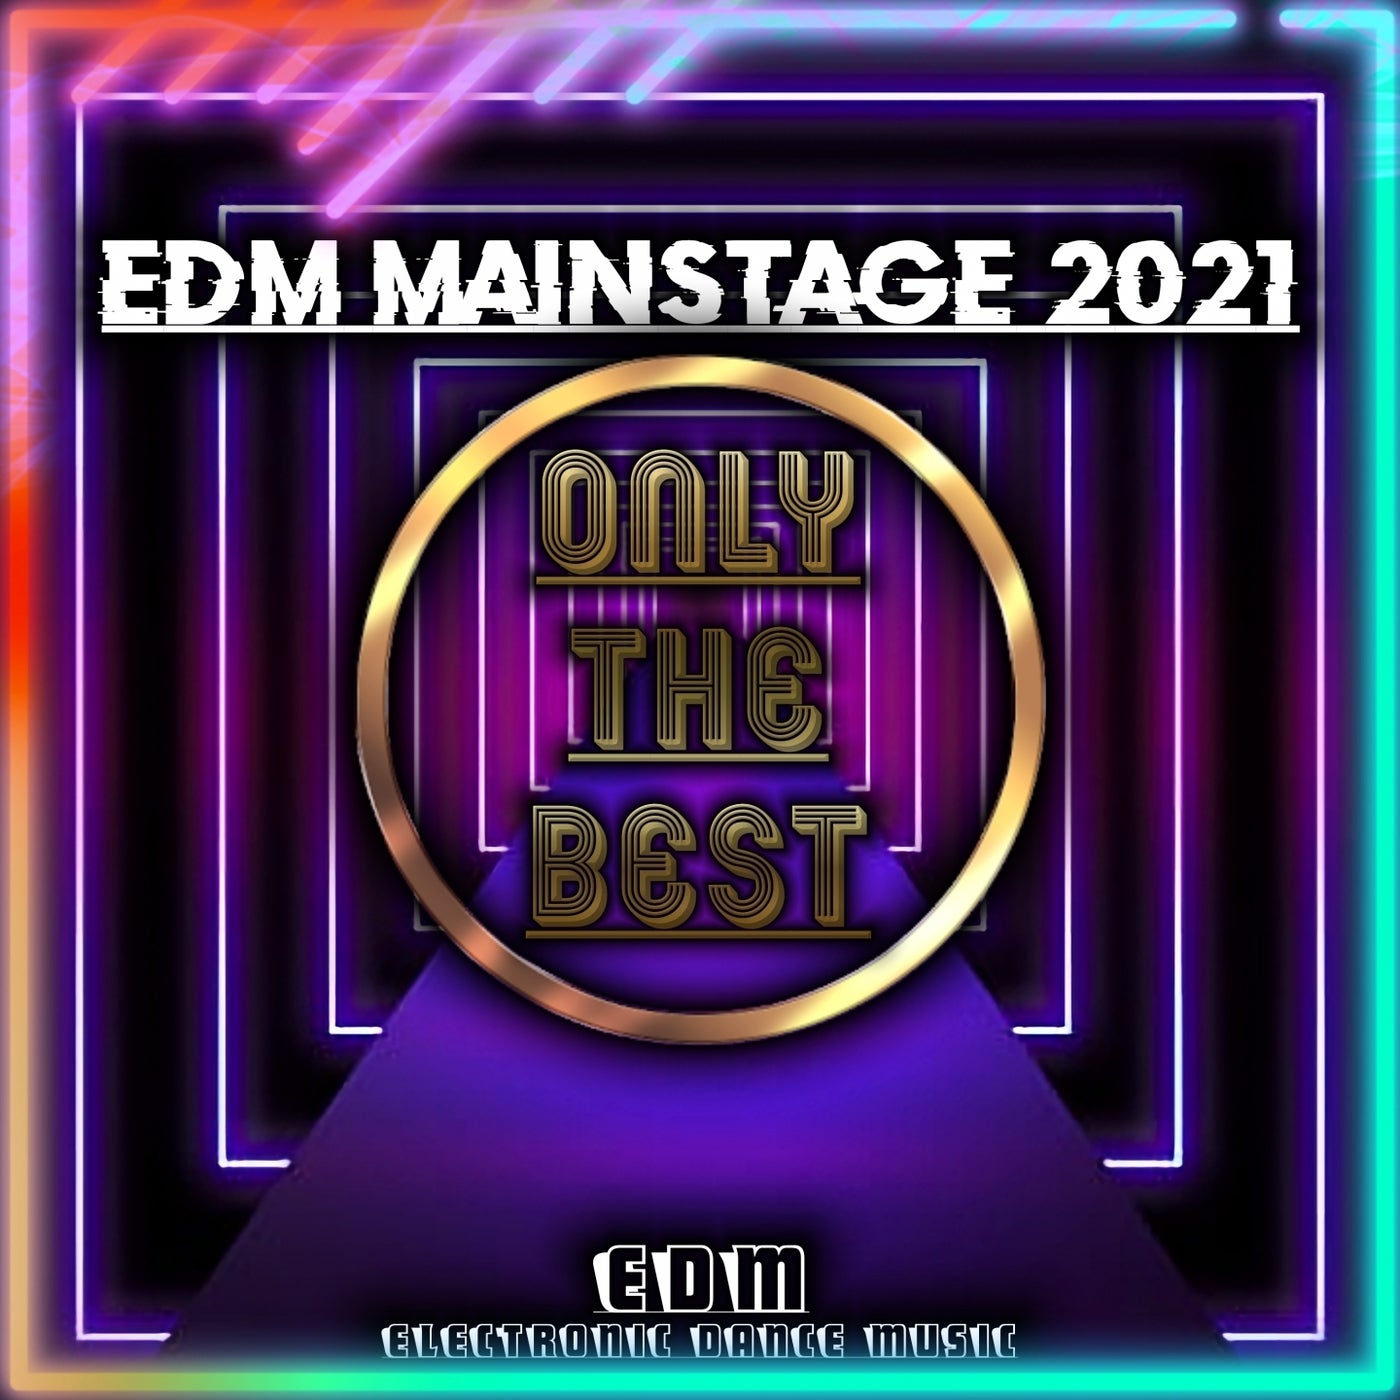 Compilation Only the Best Edm Mainstage 2021